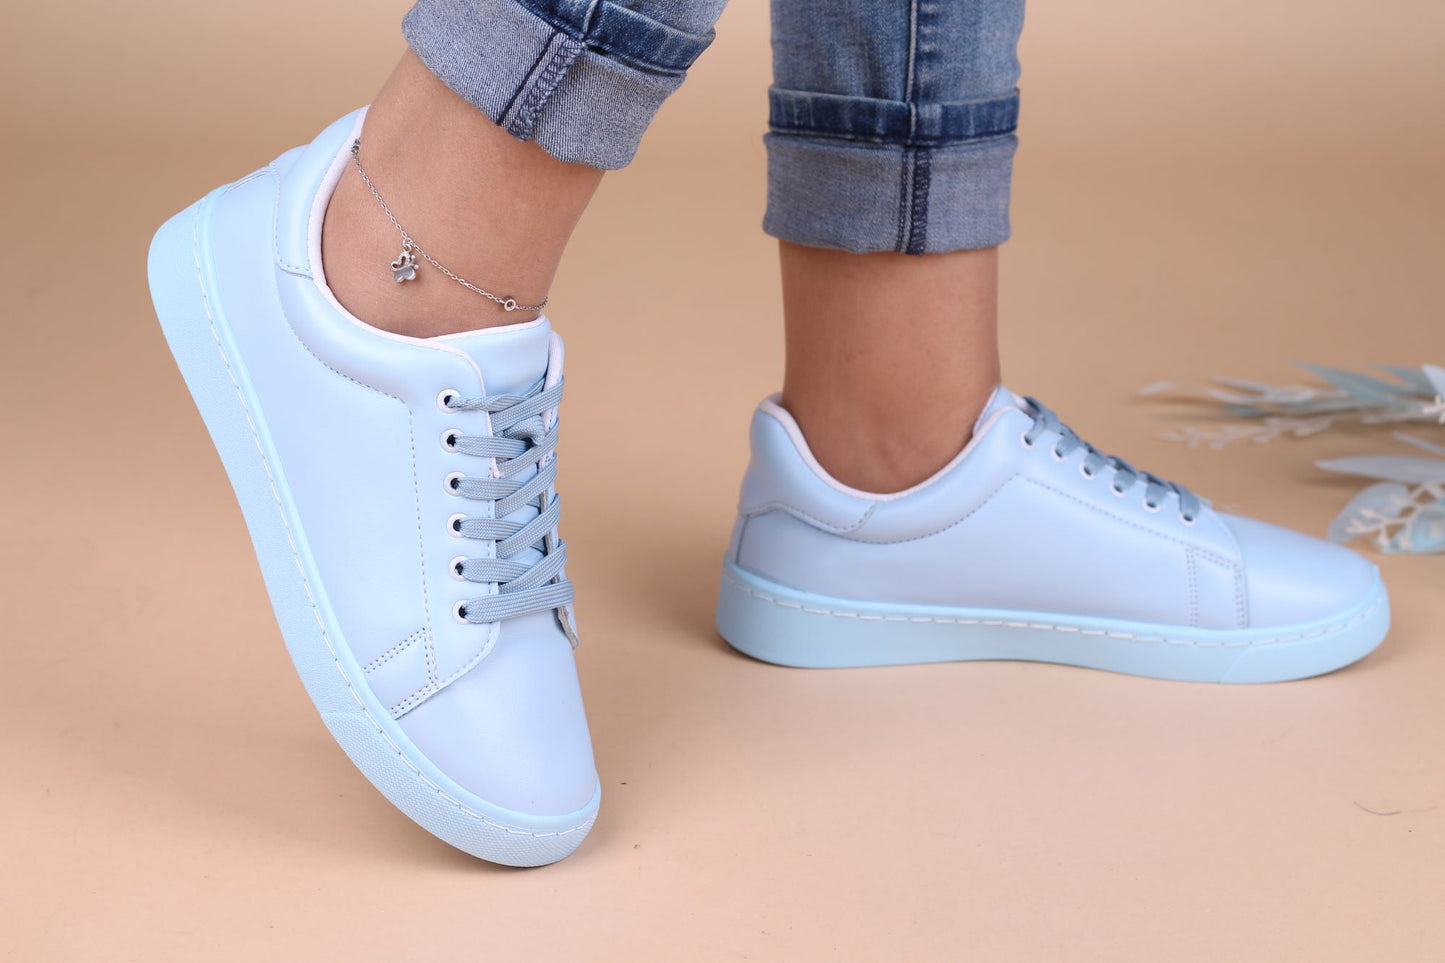 Women's Sneakers with a light and comfortable lace-up from shoppingooo